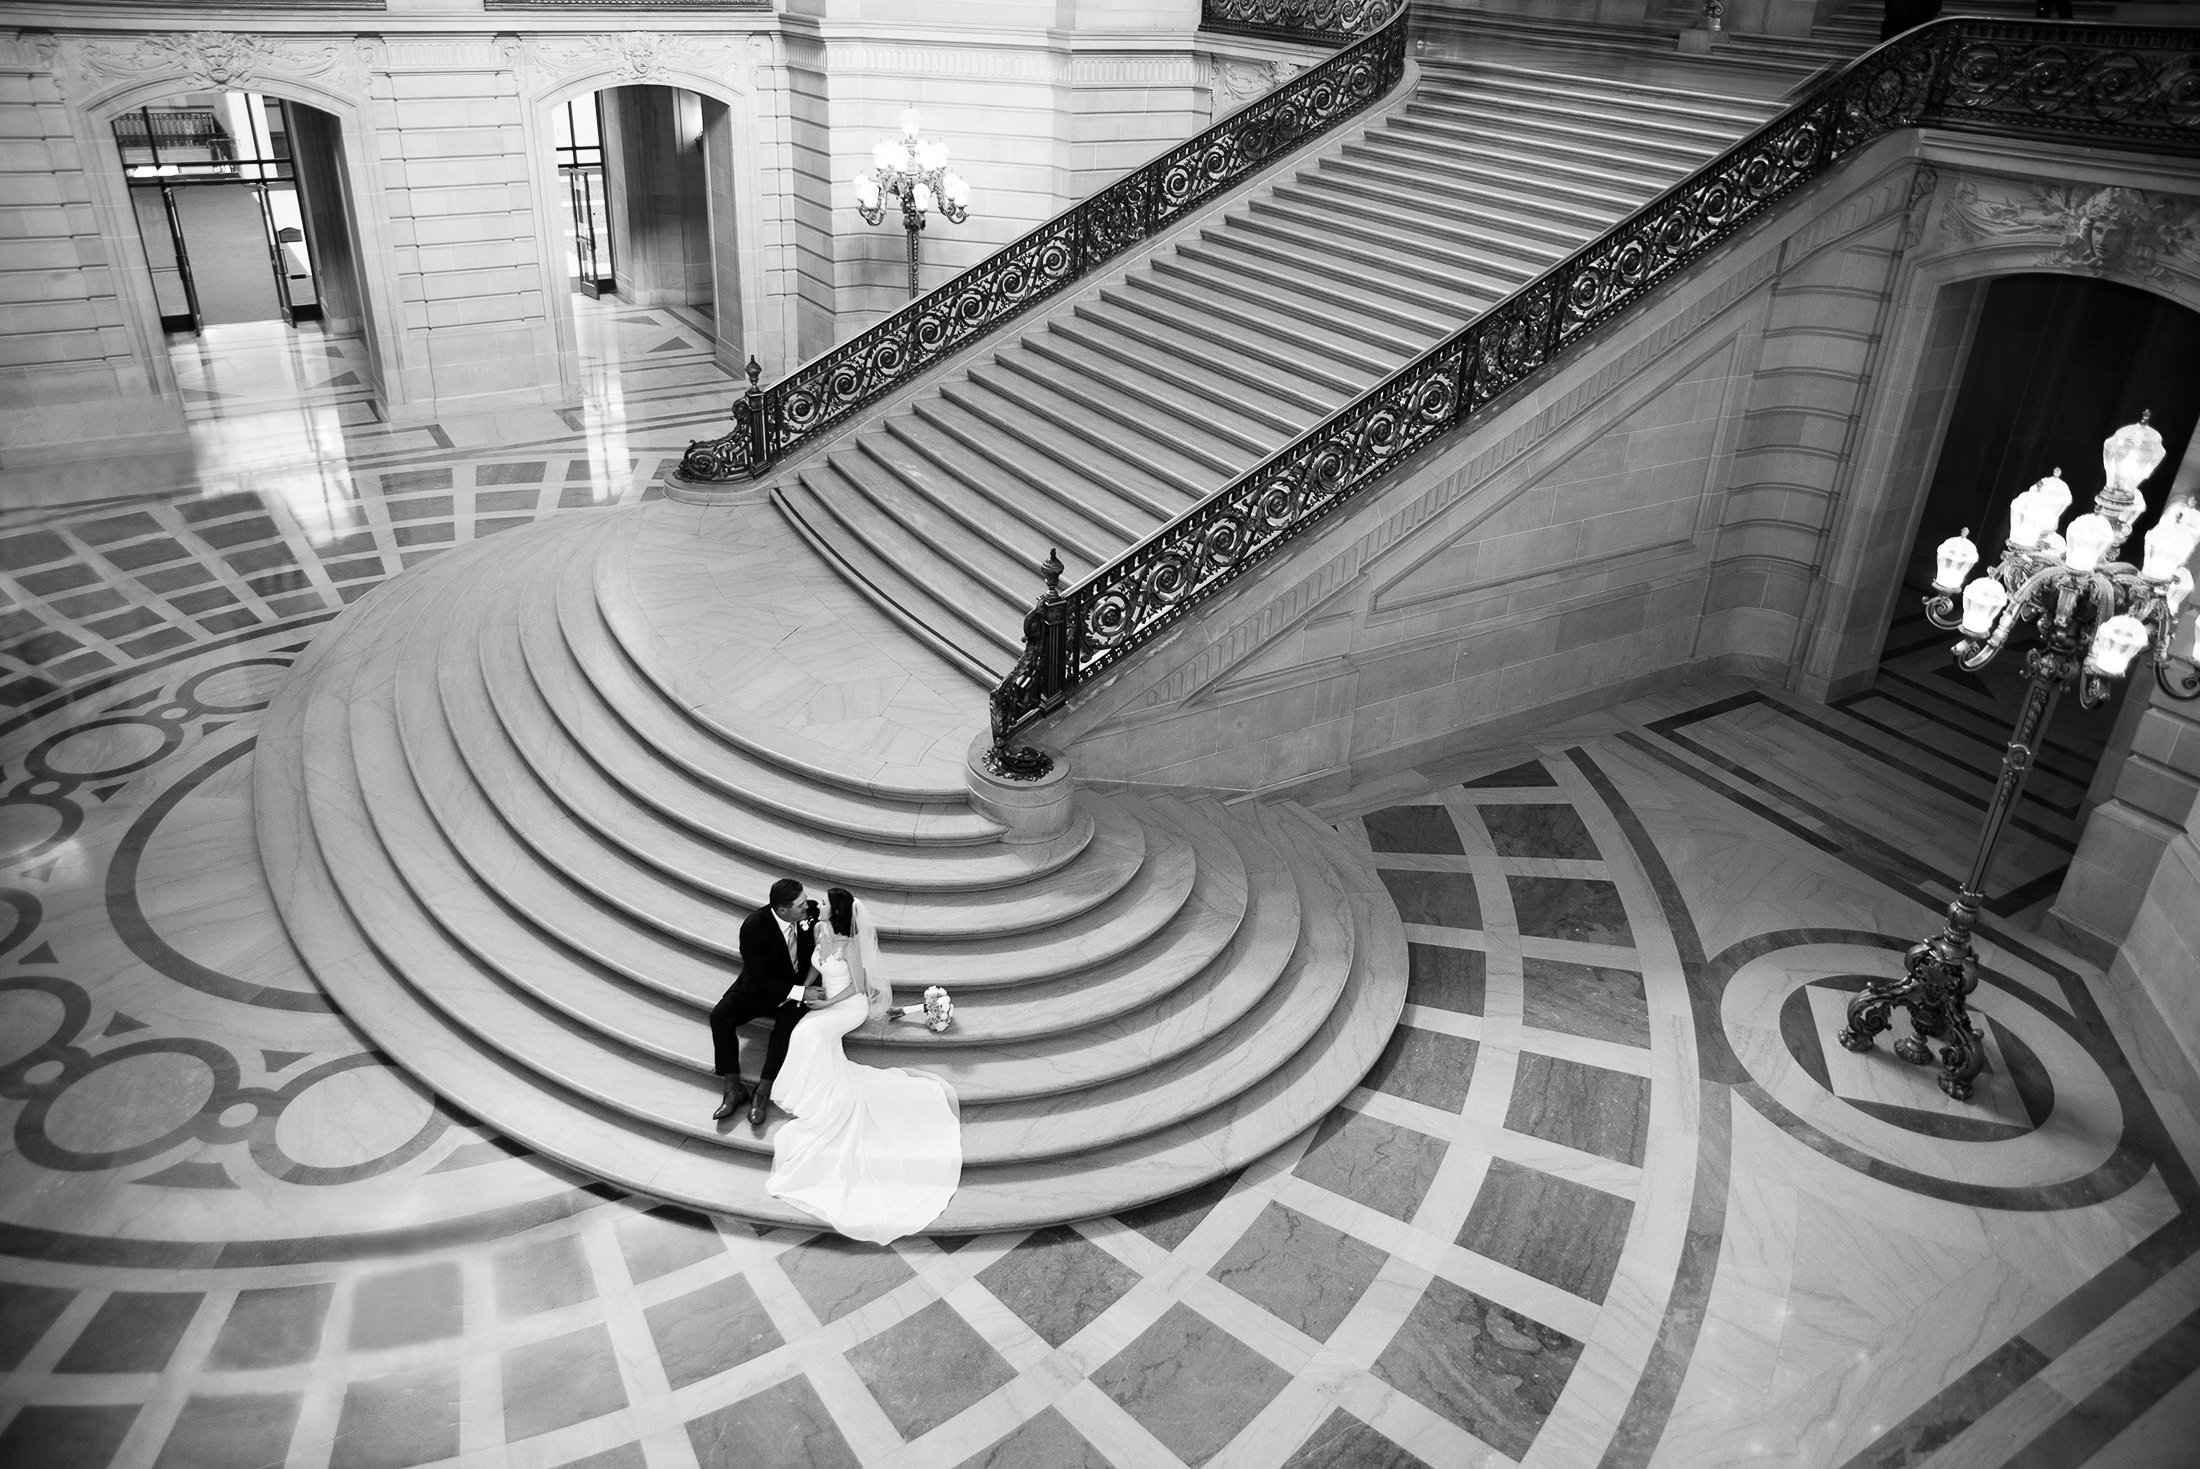 Sitting on the steps at San Francisco City Hall